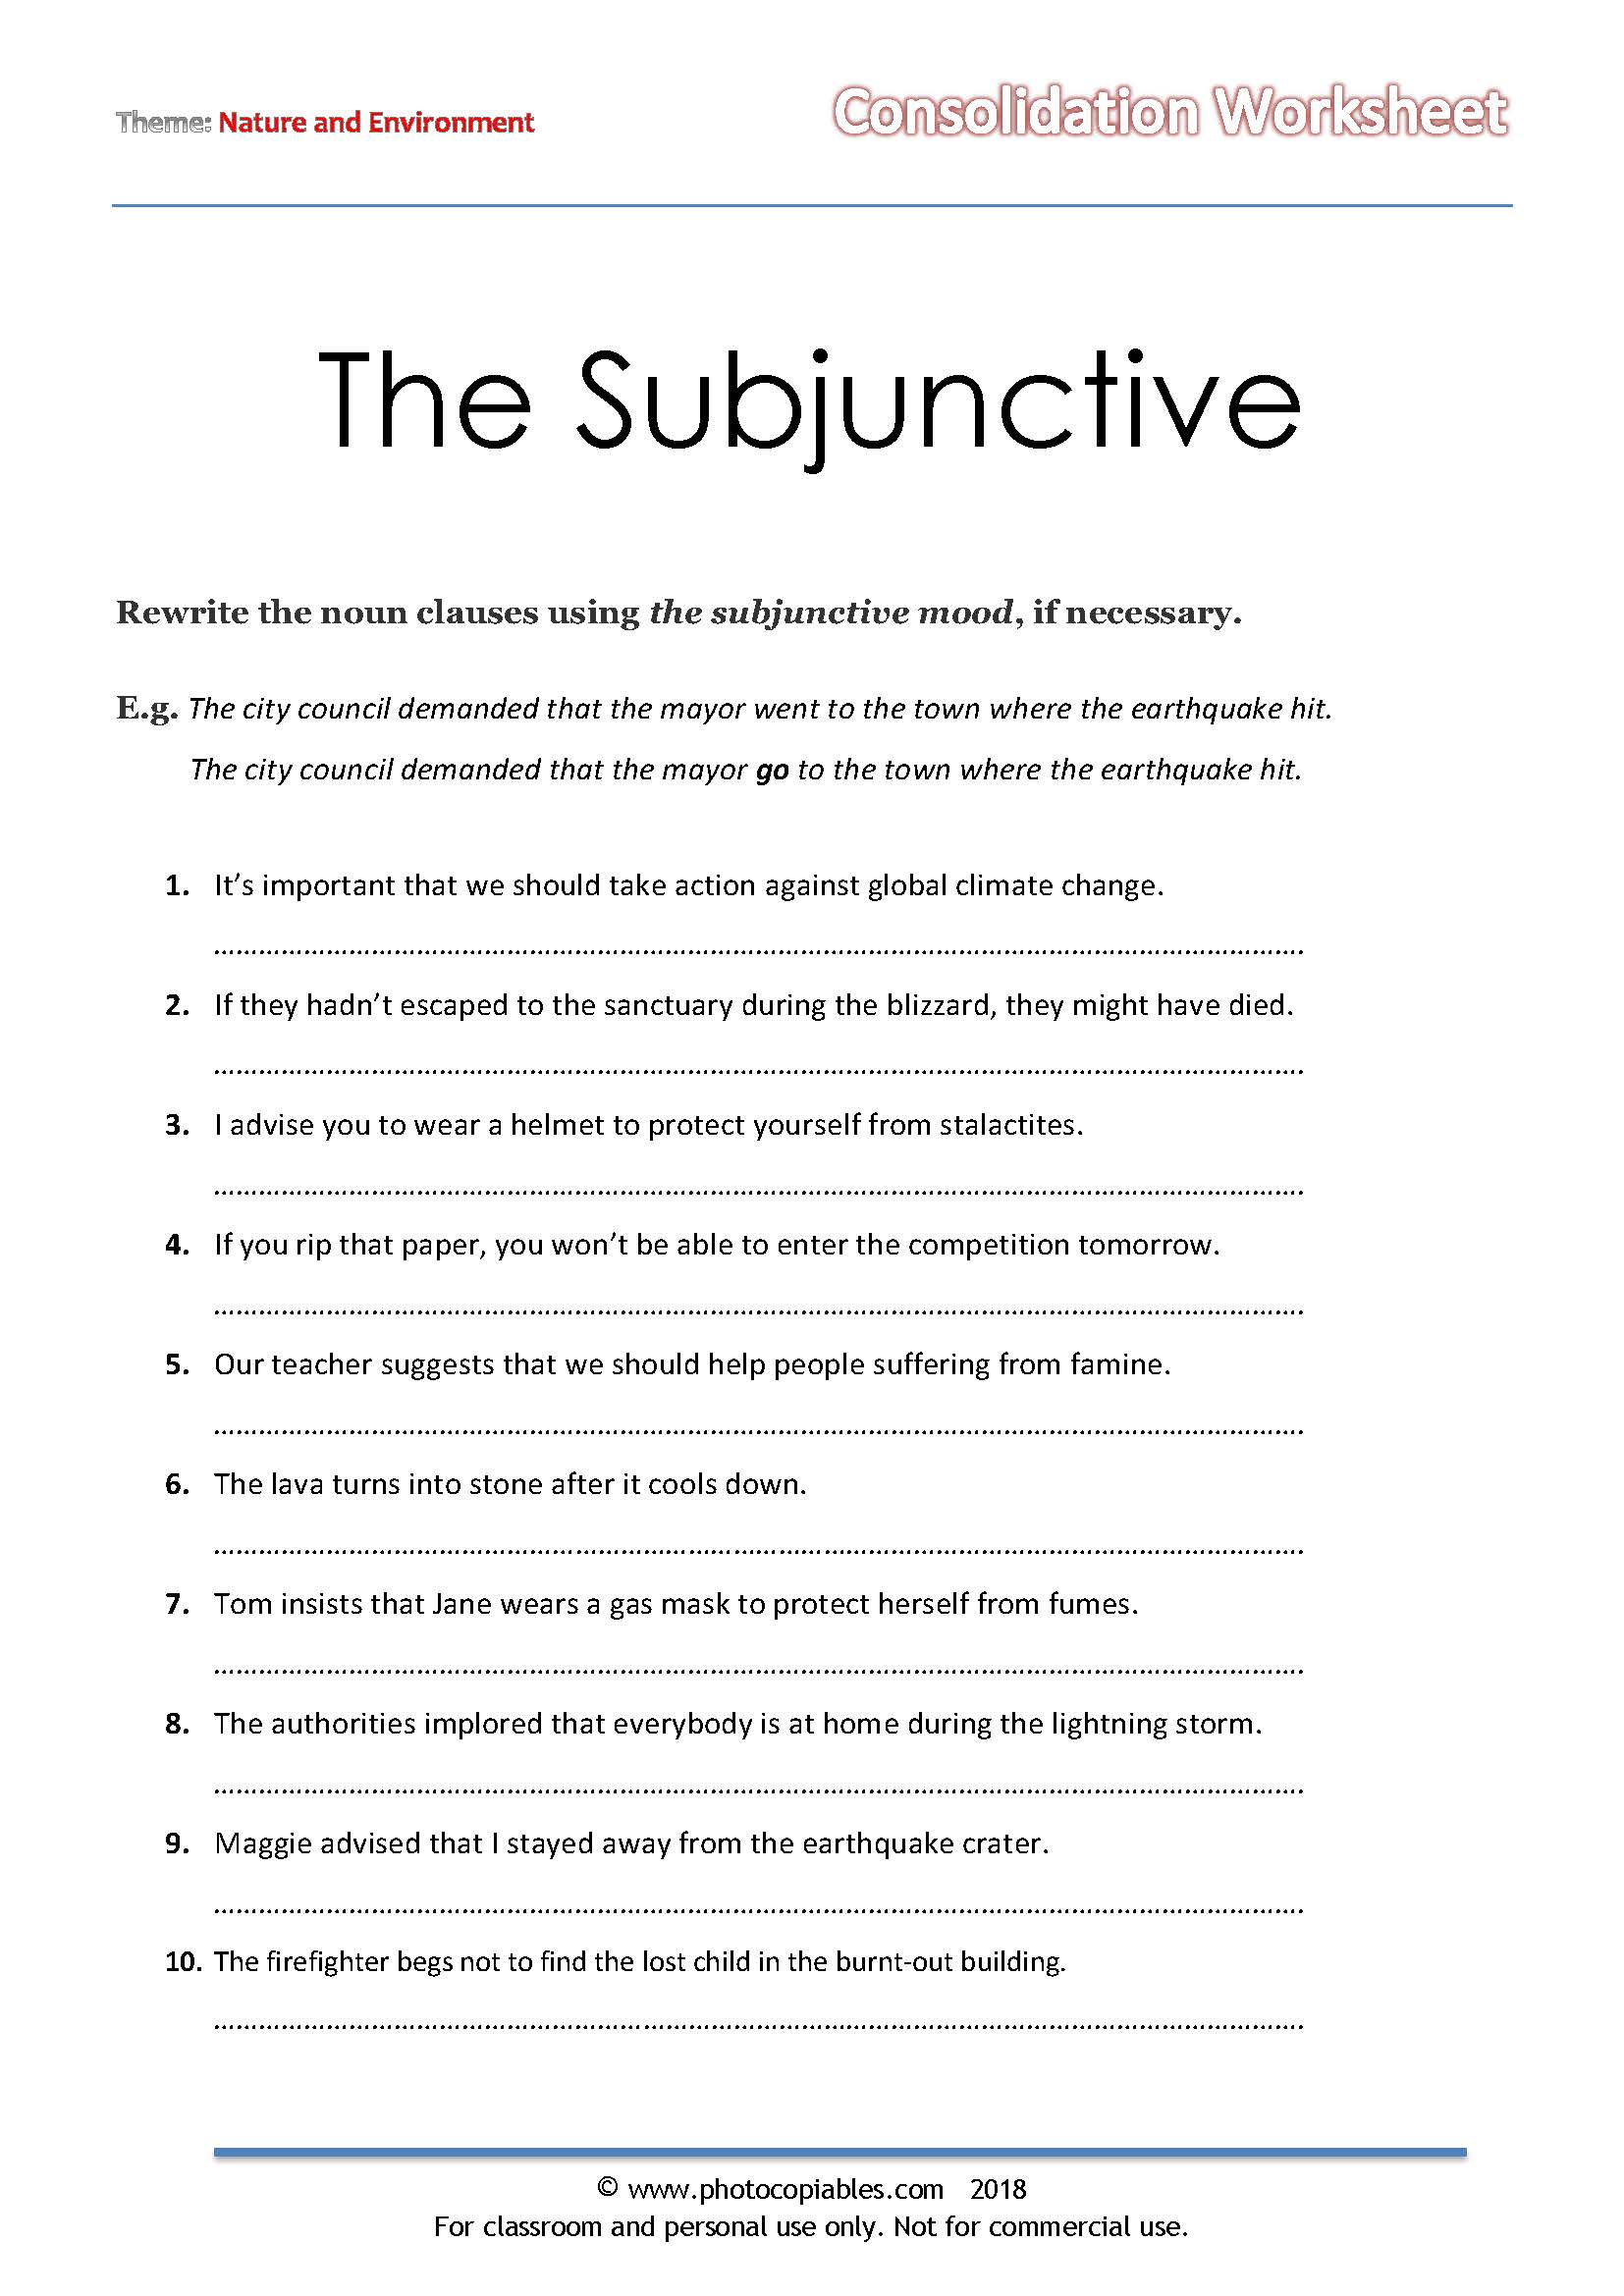 the-subjunctive-mood-worksheet-photocopiables